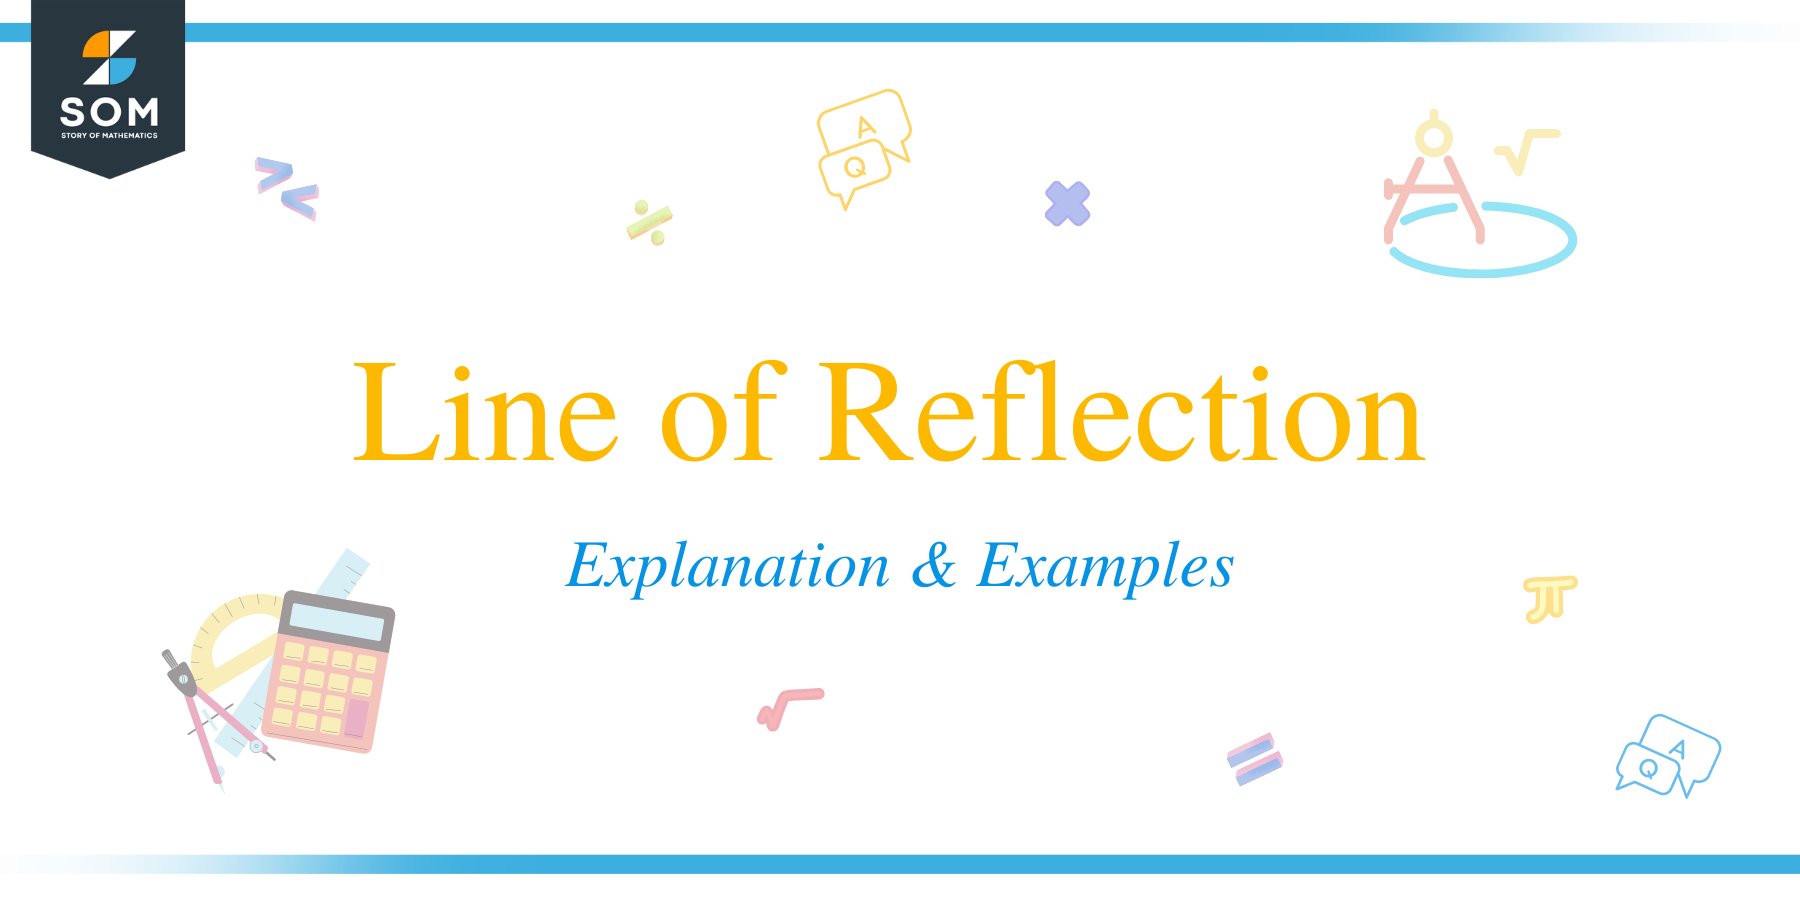 Line of Reflection